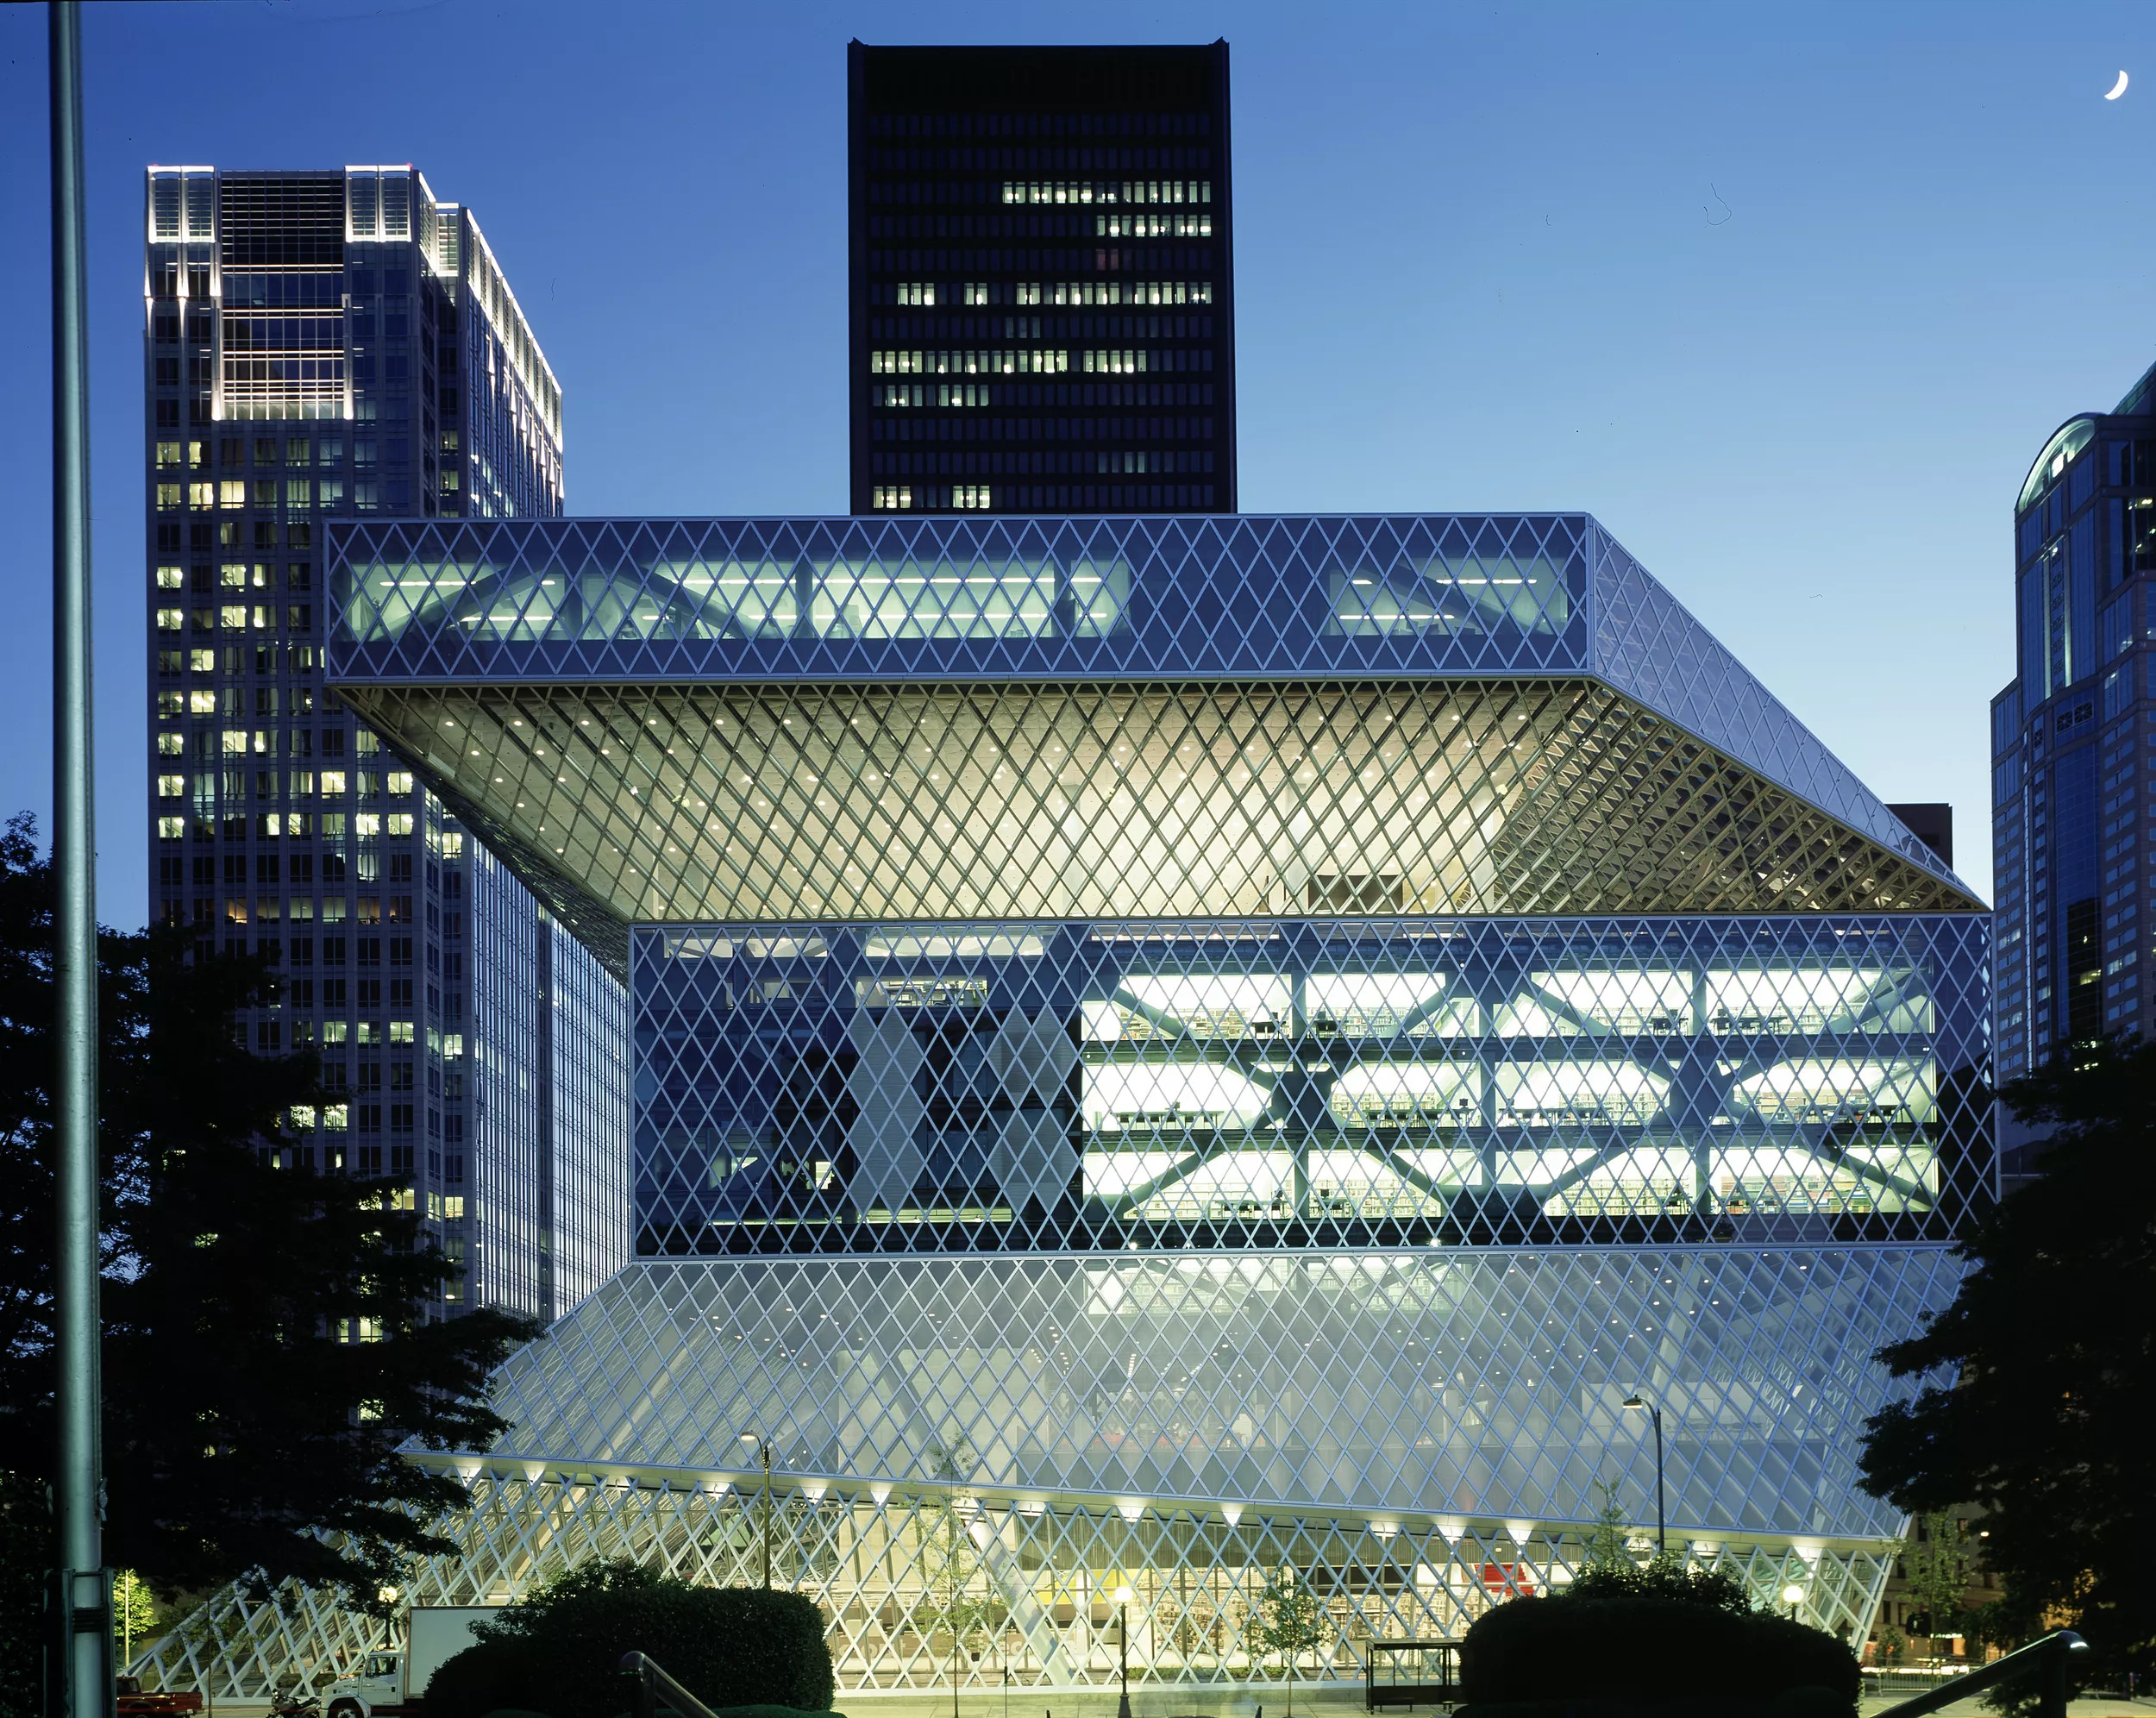 The Seattle Central Library